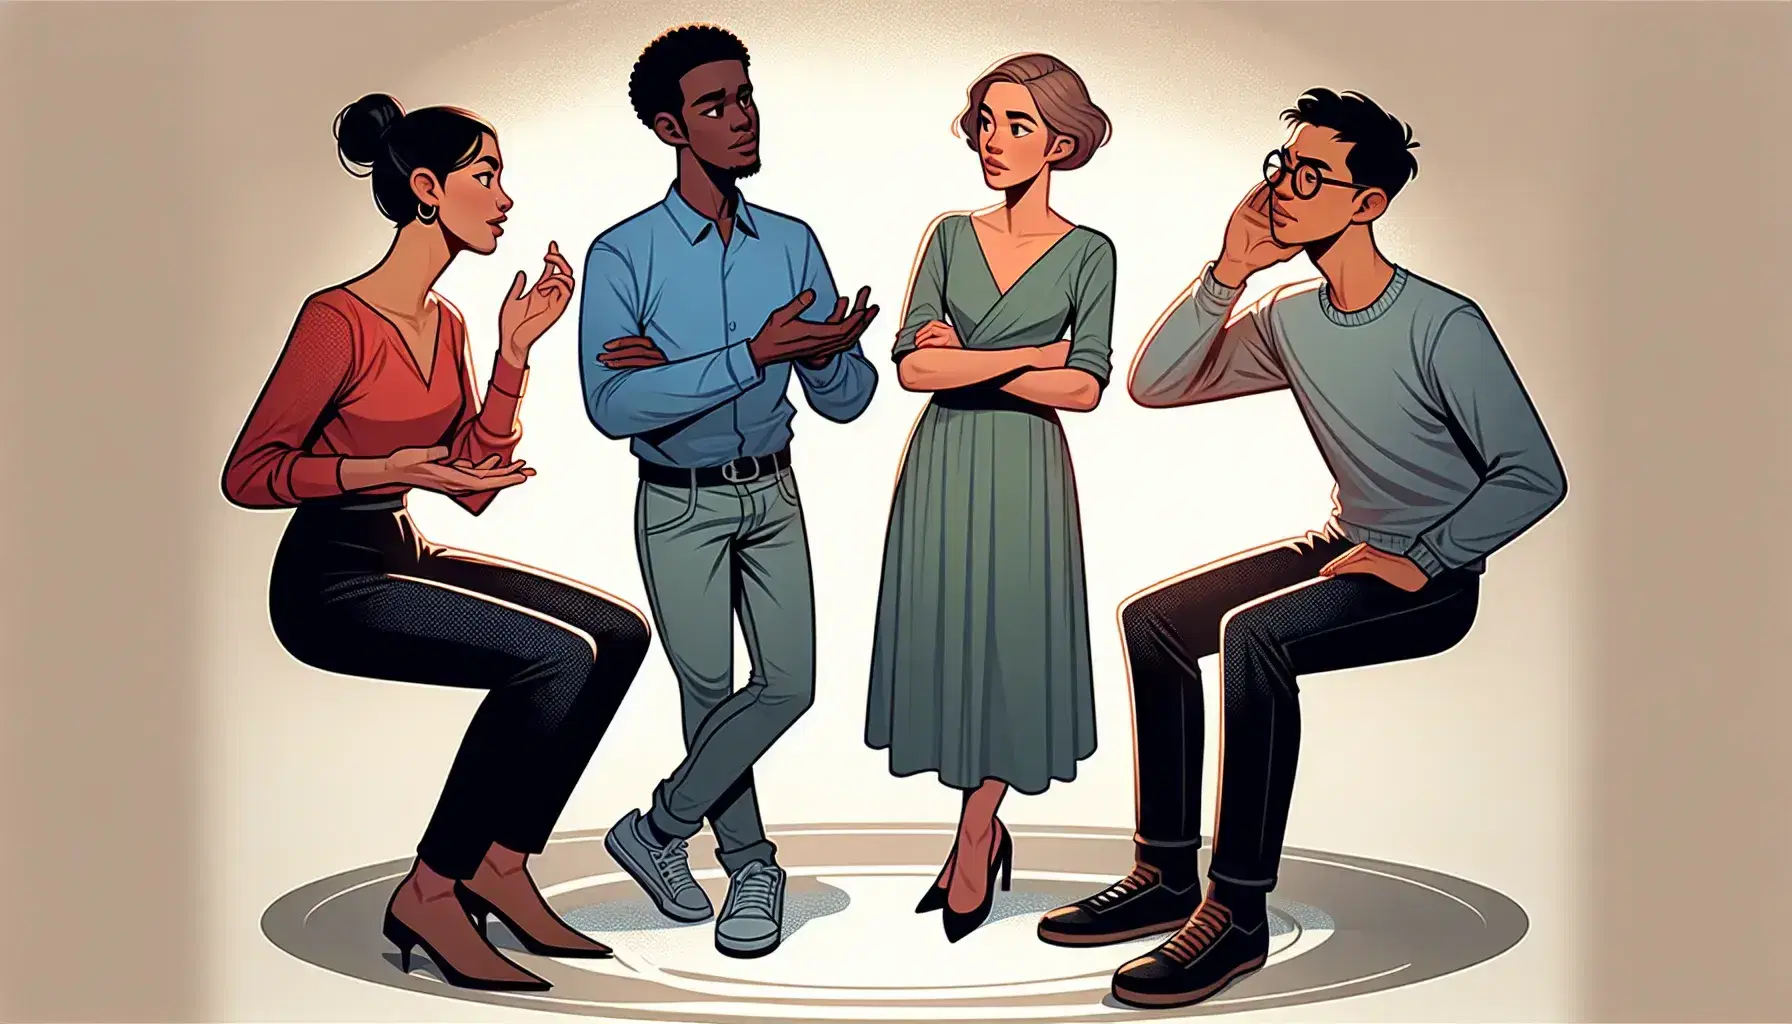 Four diverse professionals engaged in a discussion, with expressive body language indicating speaking, listening, and confusion, in a softly lit, neutral setting.